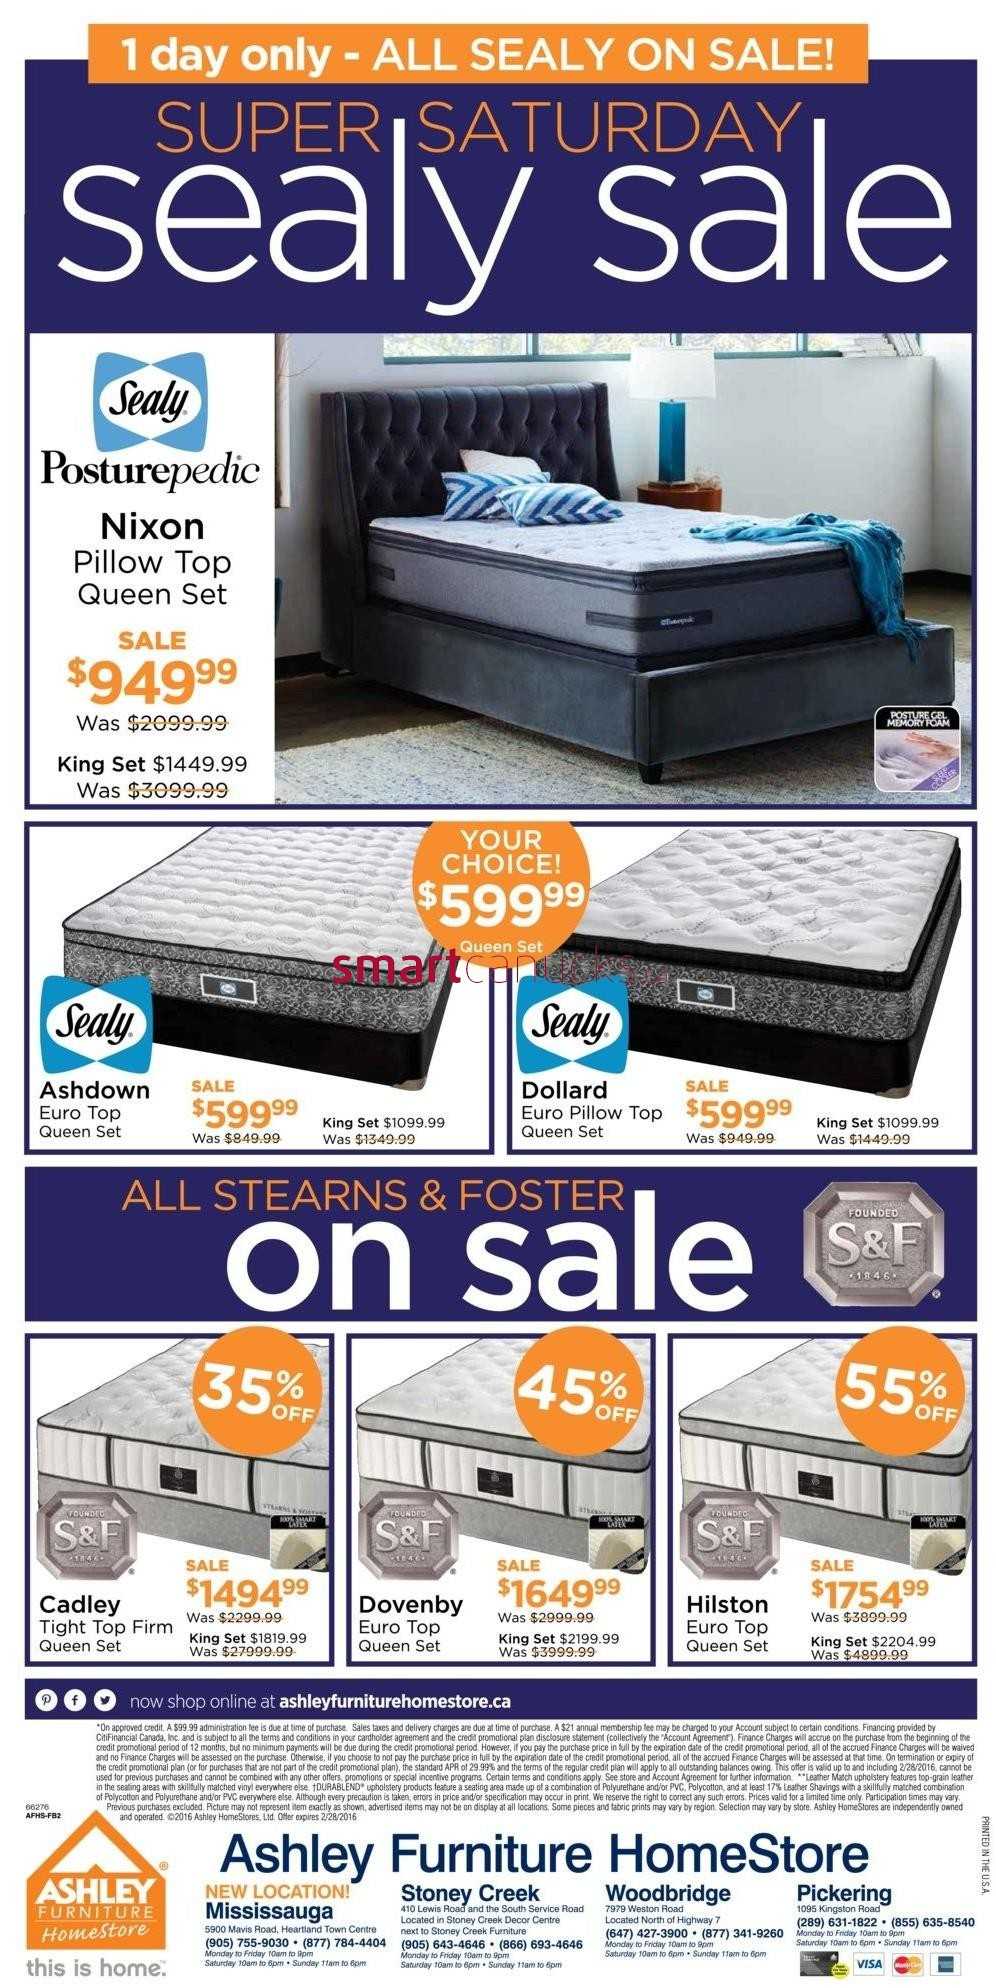 Ashley Furniture HomeStore (ON) Weekend Sale Flyer February 26 to 28